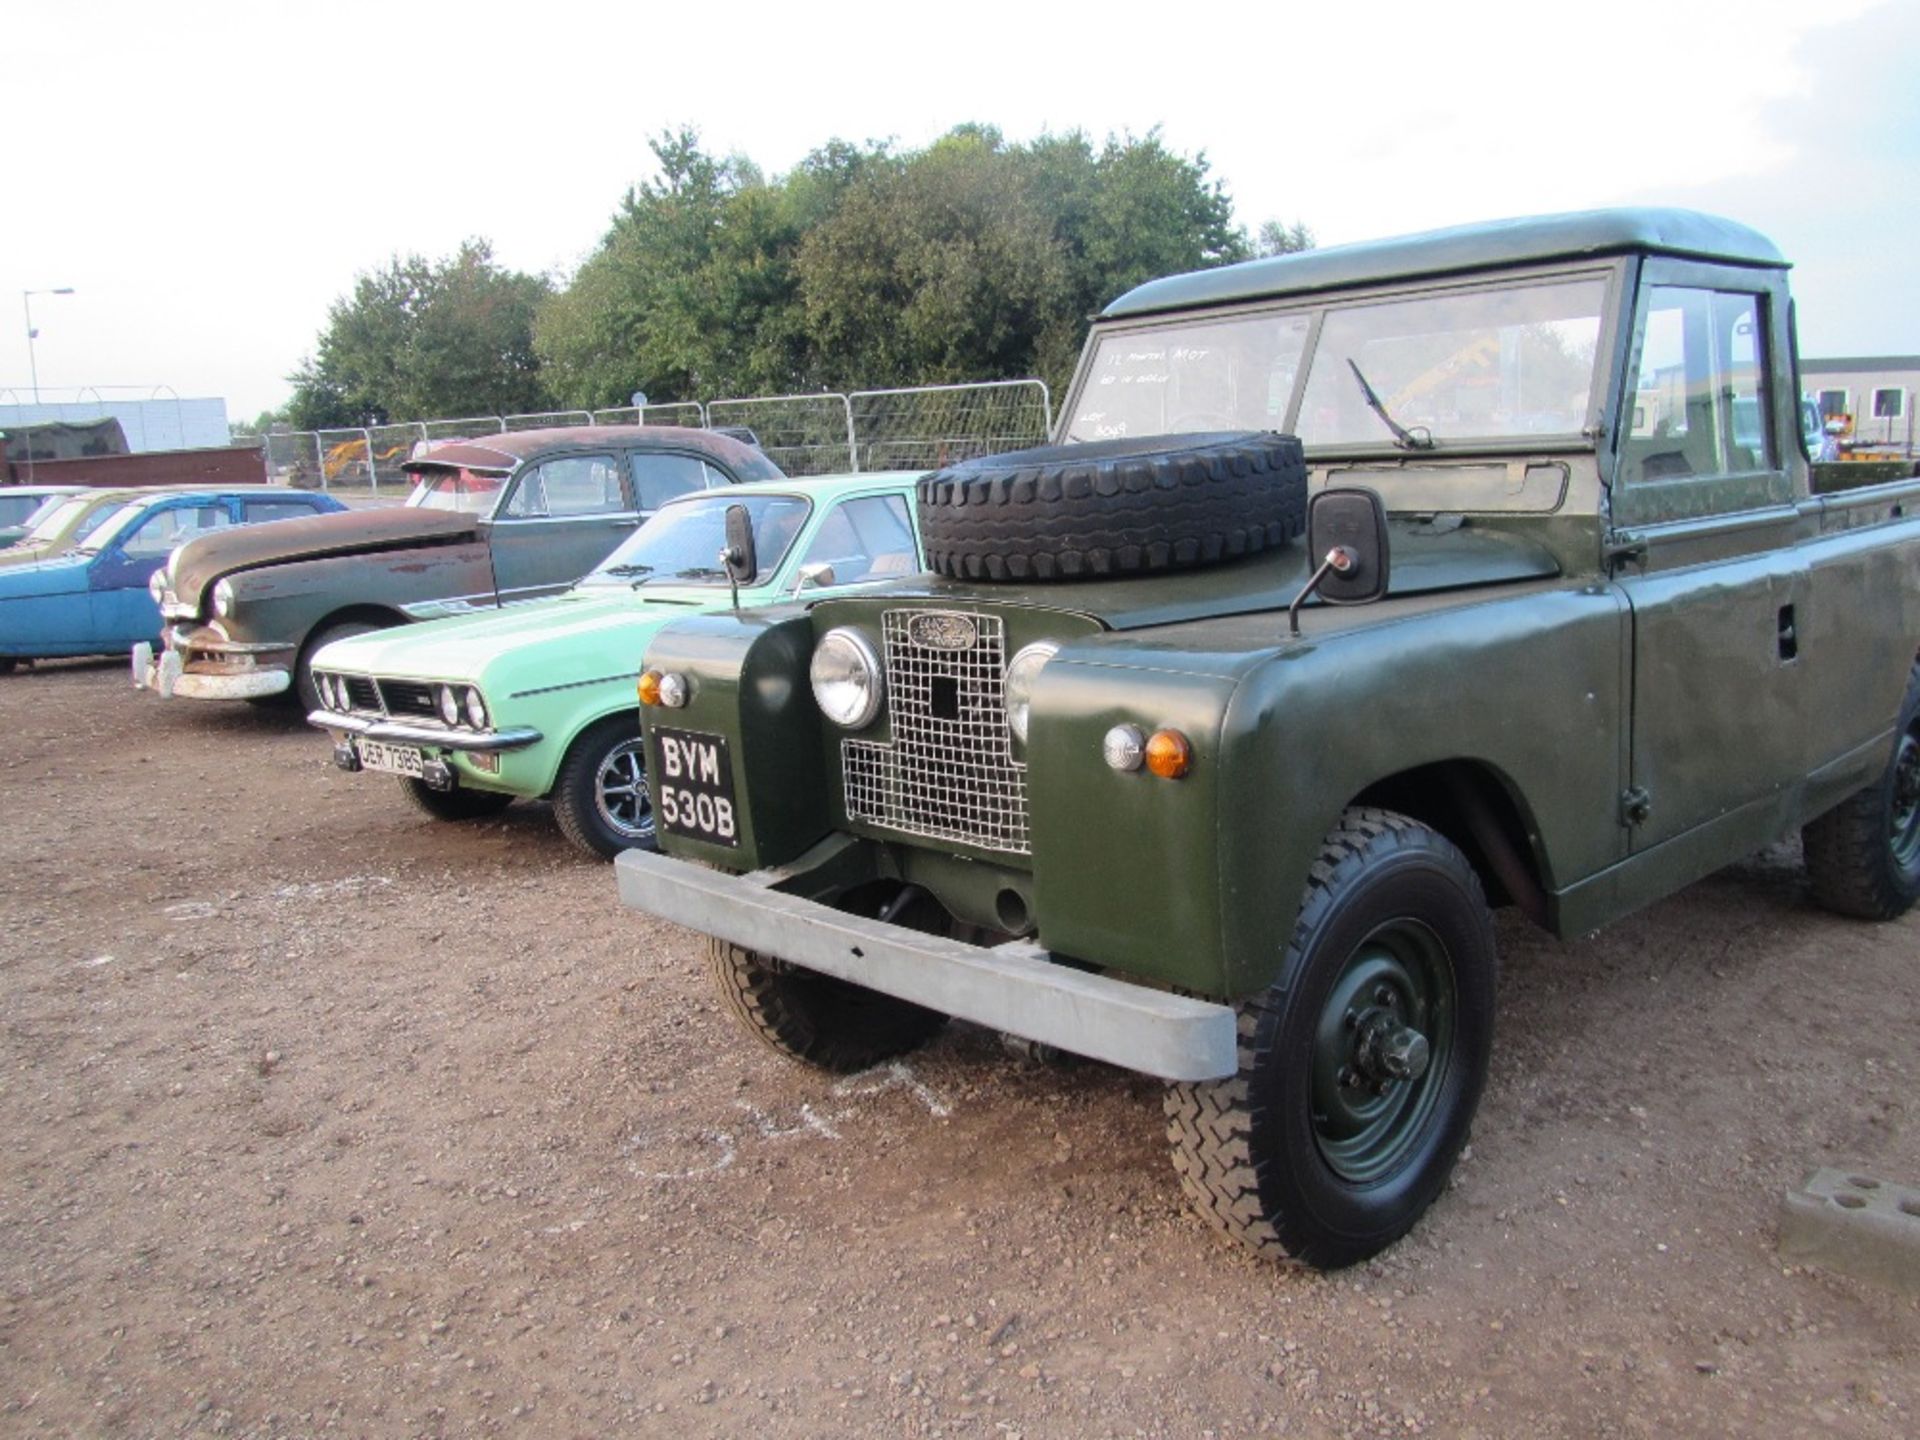 1964 Land Rover S II Reg No: BYM 530B Serial No: 2760359SB Fitted with a British Perkins diesel